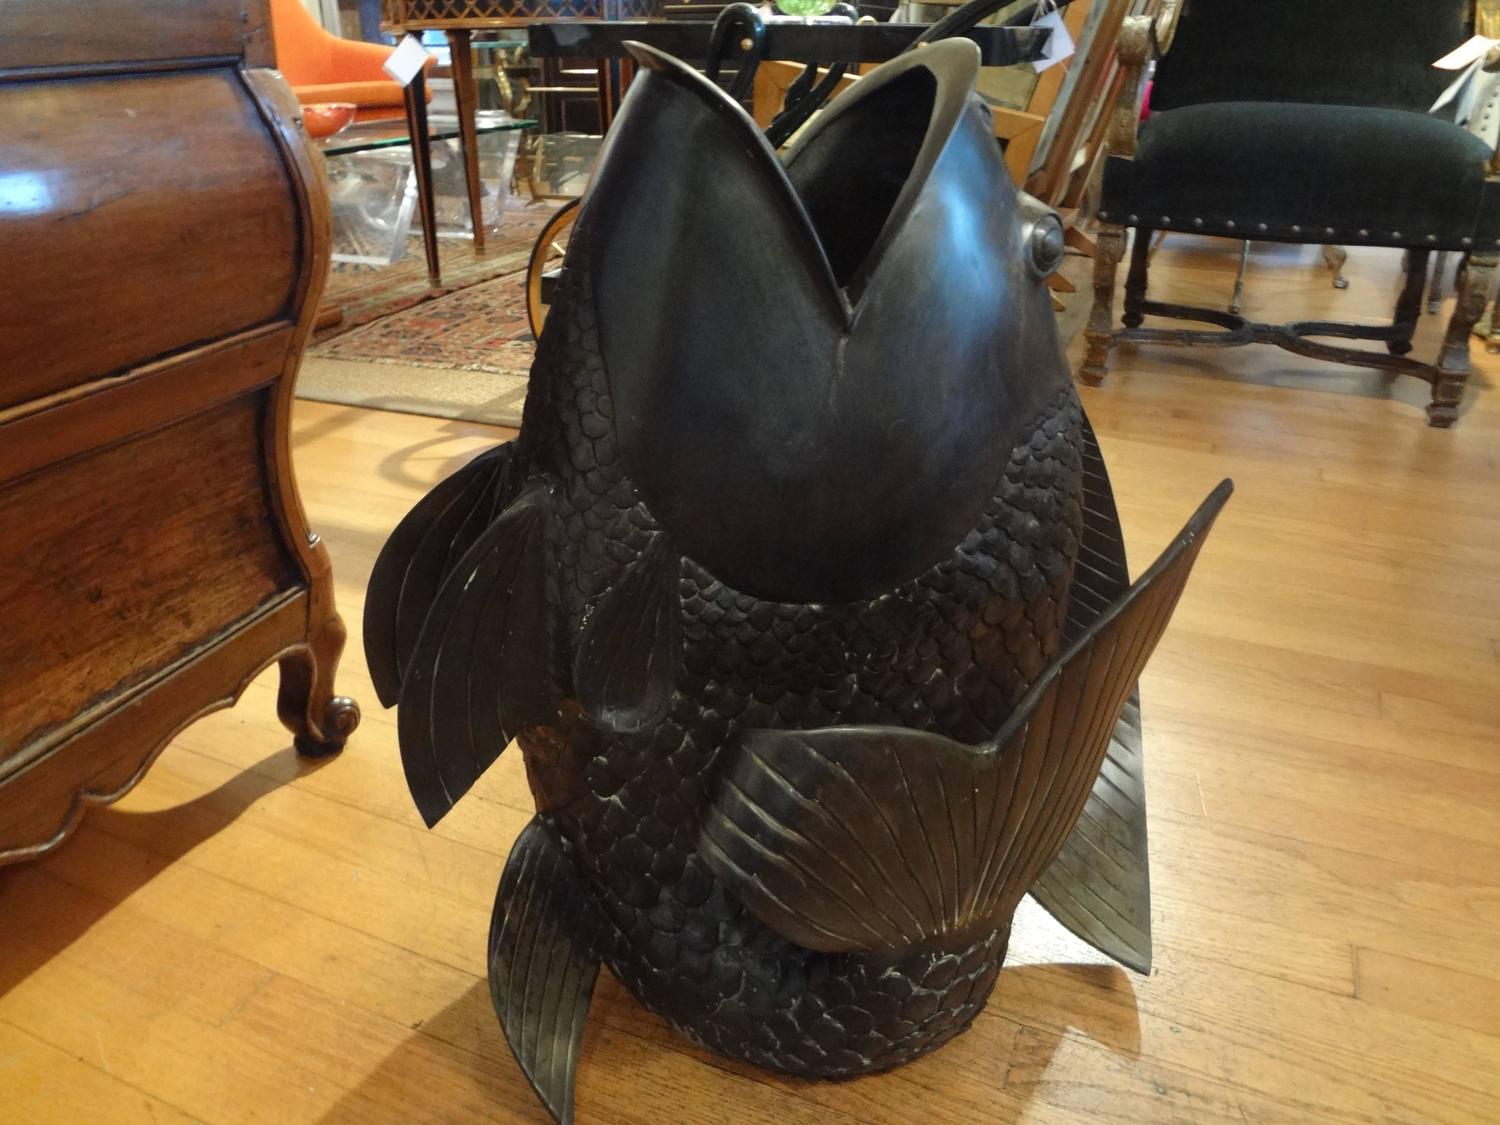 Large Japanese Bronze "Koi" Fish Sculpture For Sale at 1stdibs